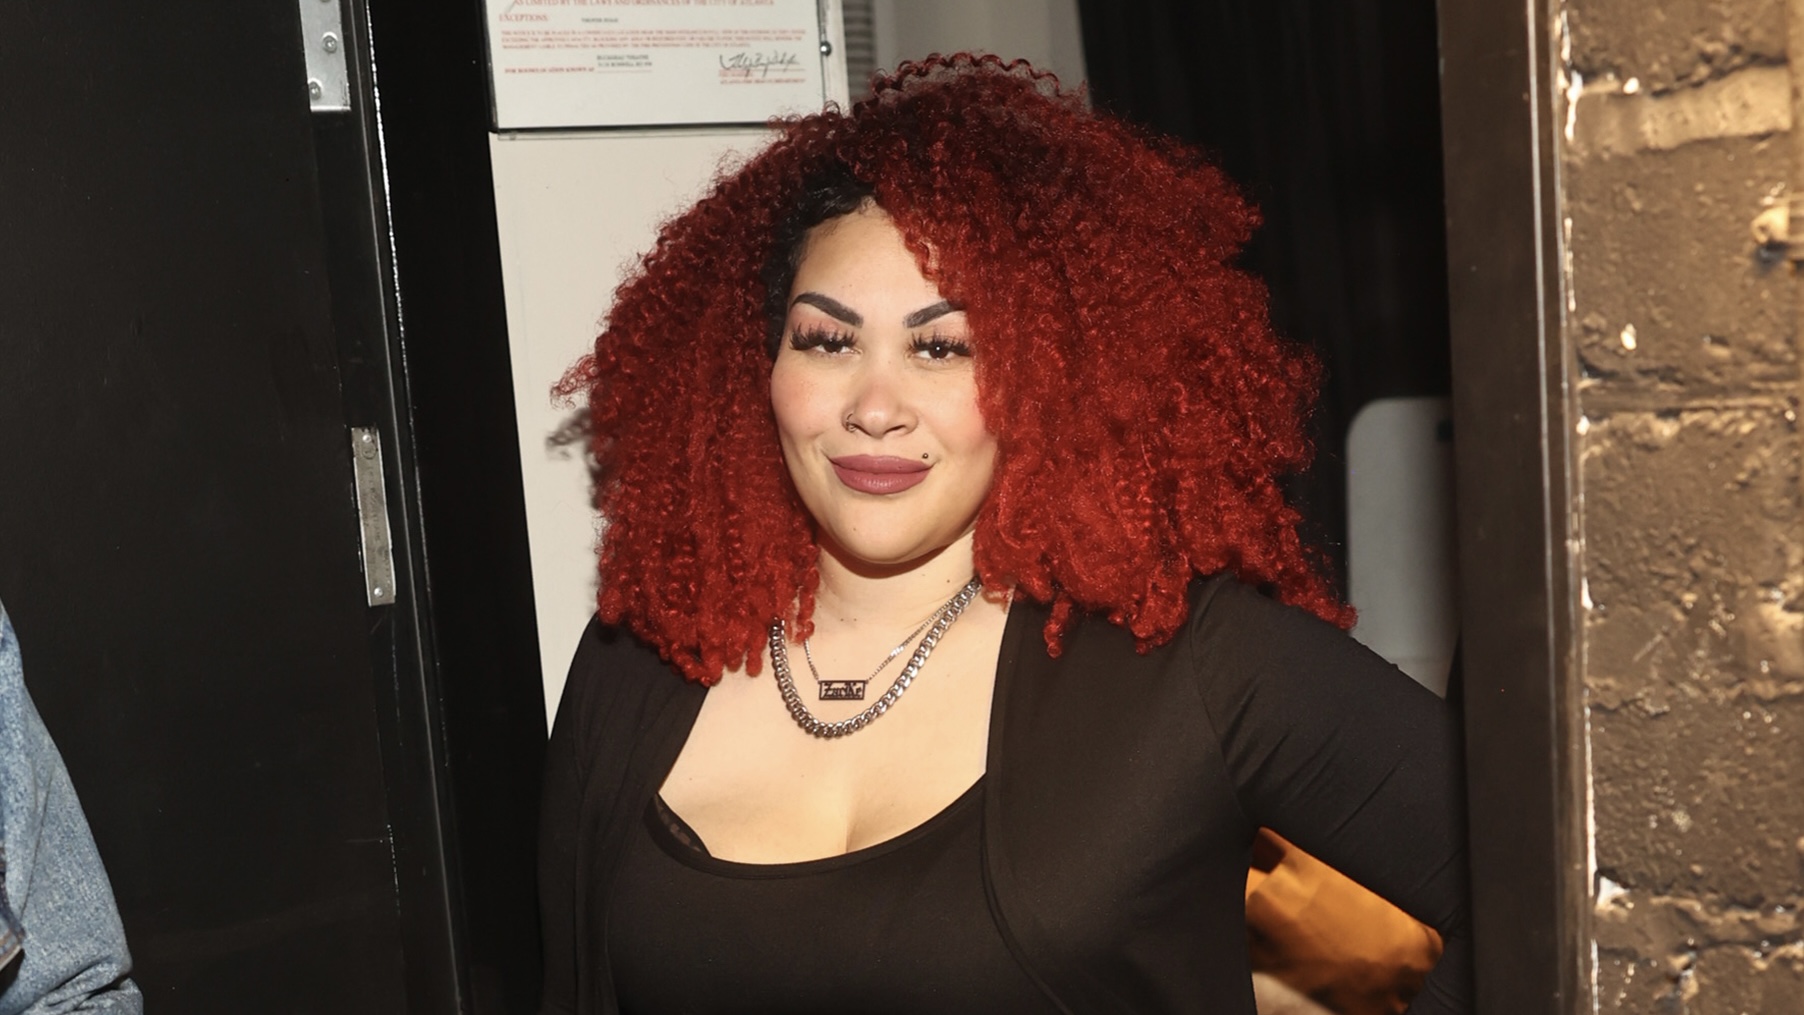 Keke Wyatt Reveals She’s Opening Her Own Church Focused On THIS (Exclusive Details) thumbnail